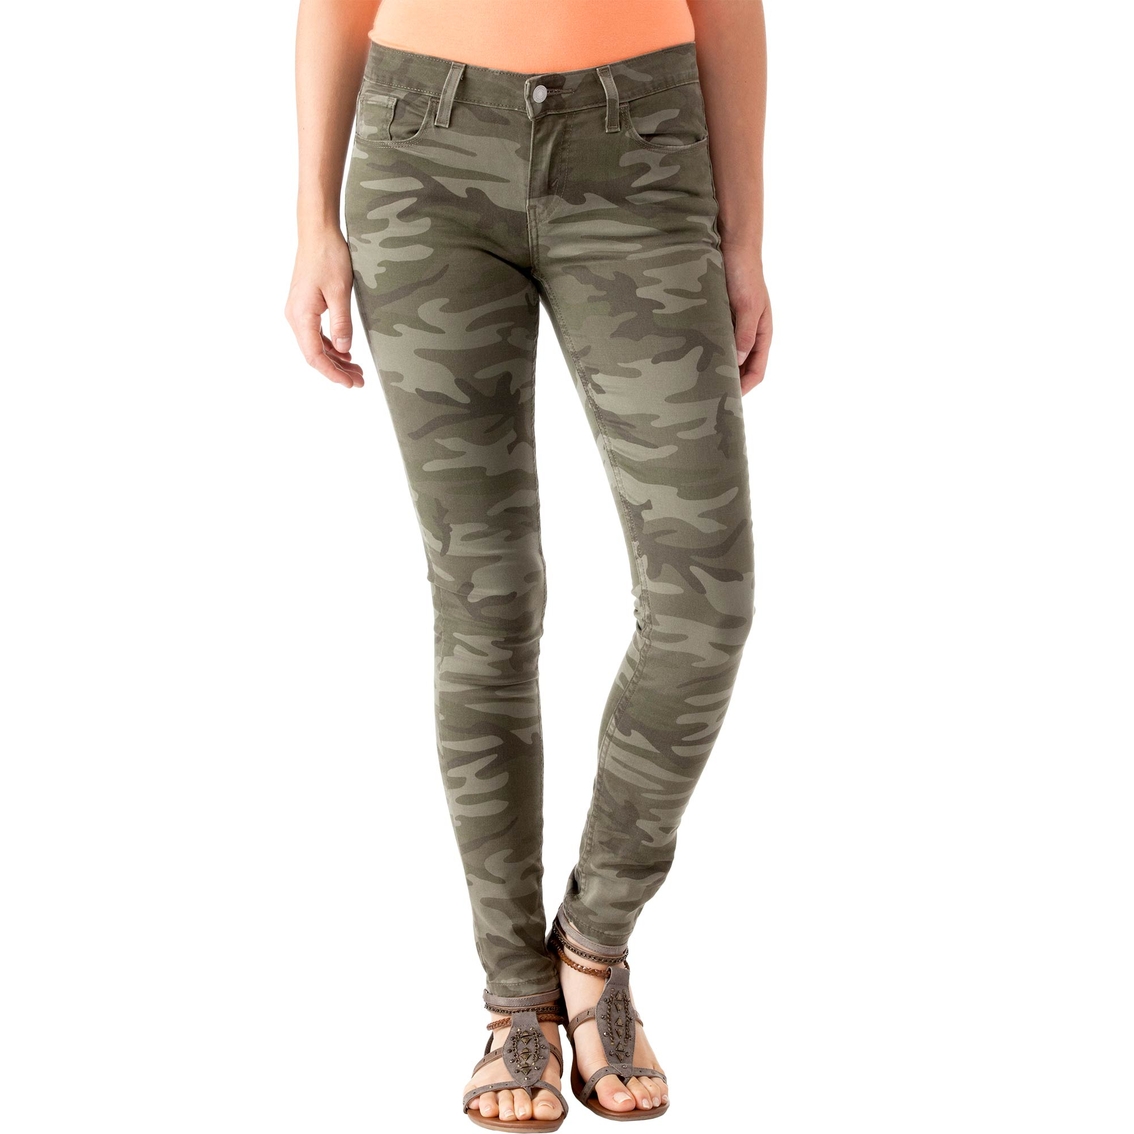 Levi's 535 Super Skinny Jeans, Camouflage | Jeans | Clothing ...